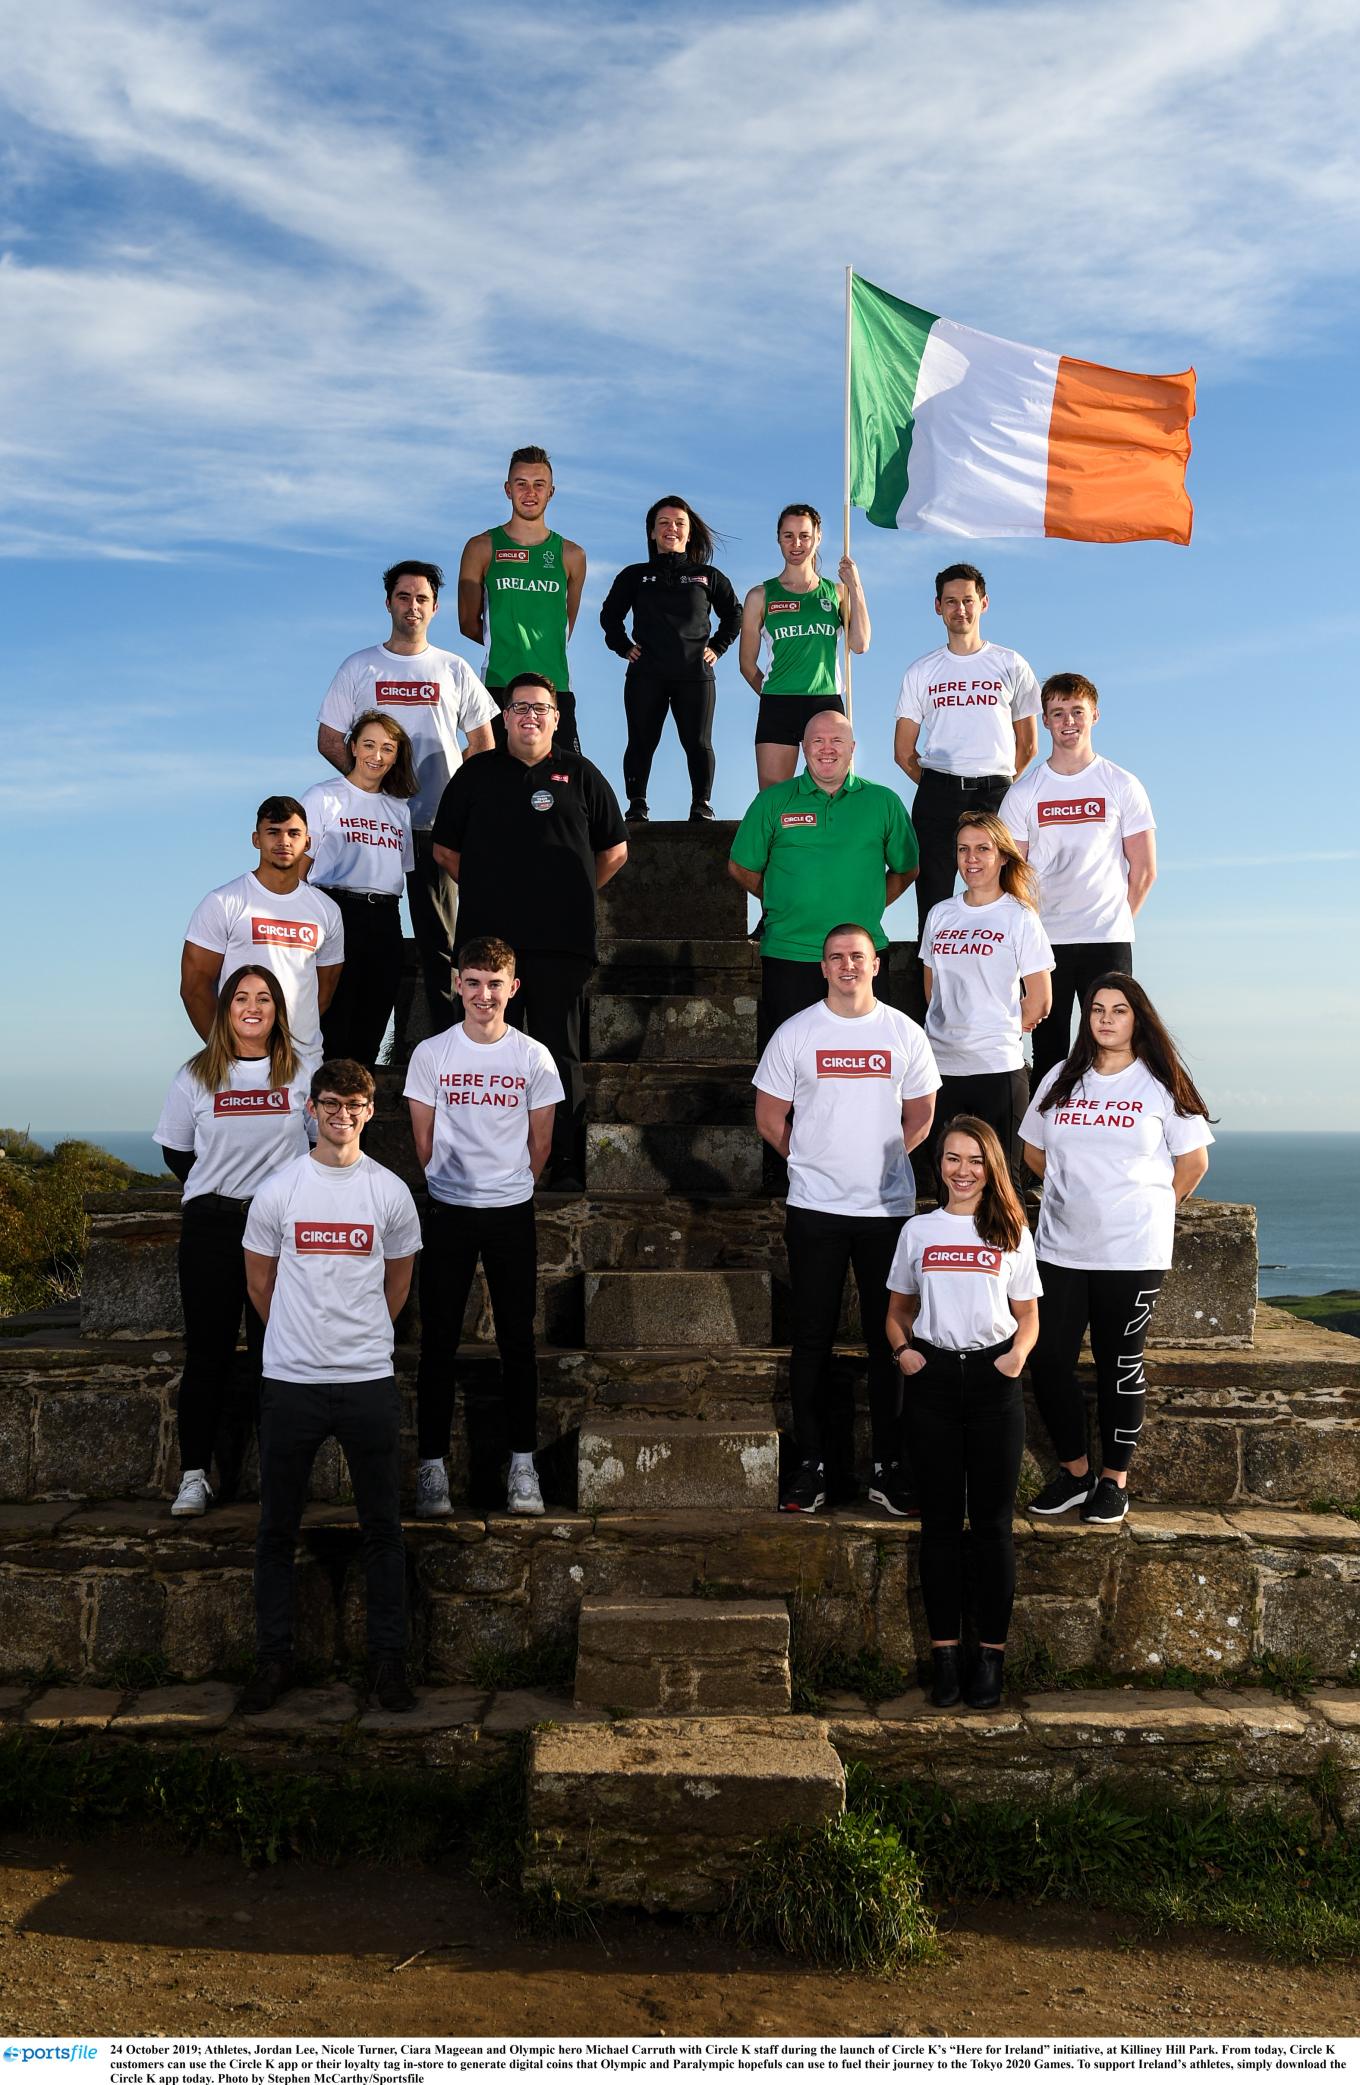 Circle K 'Here for Ireland' initiative